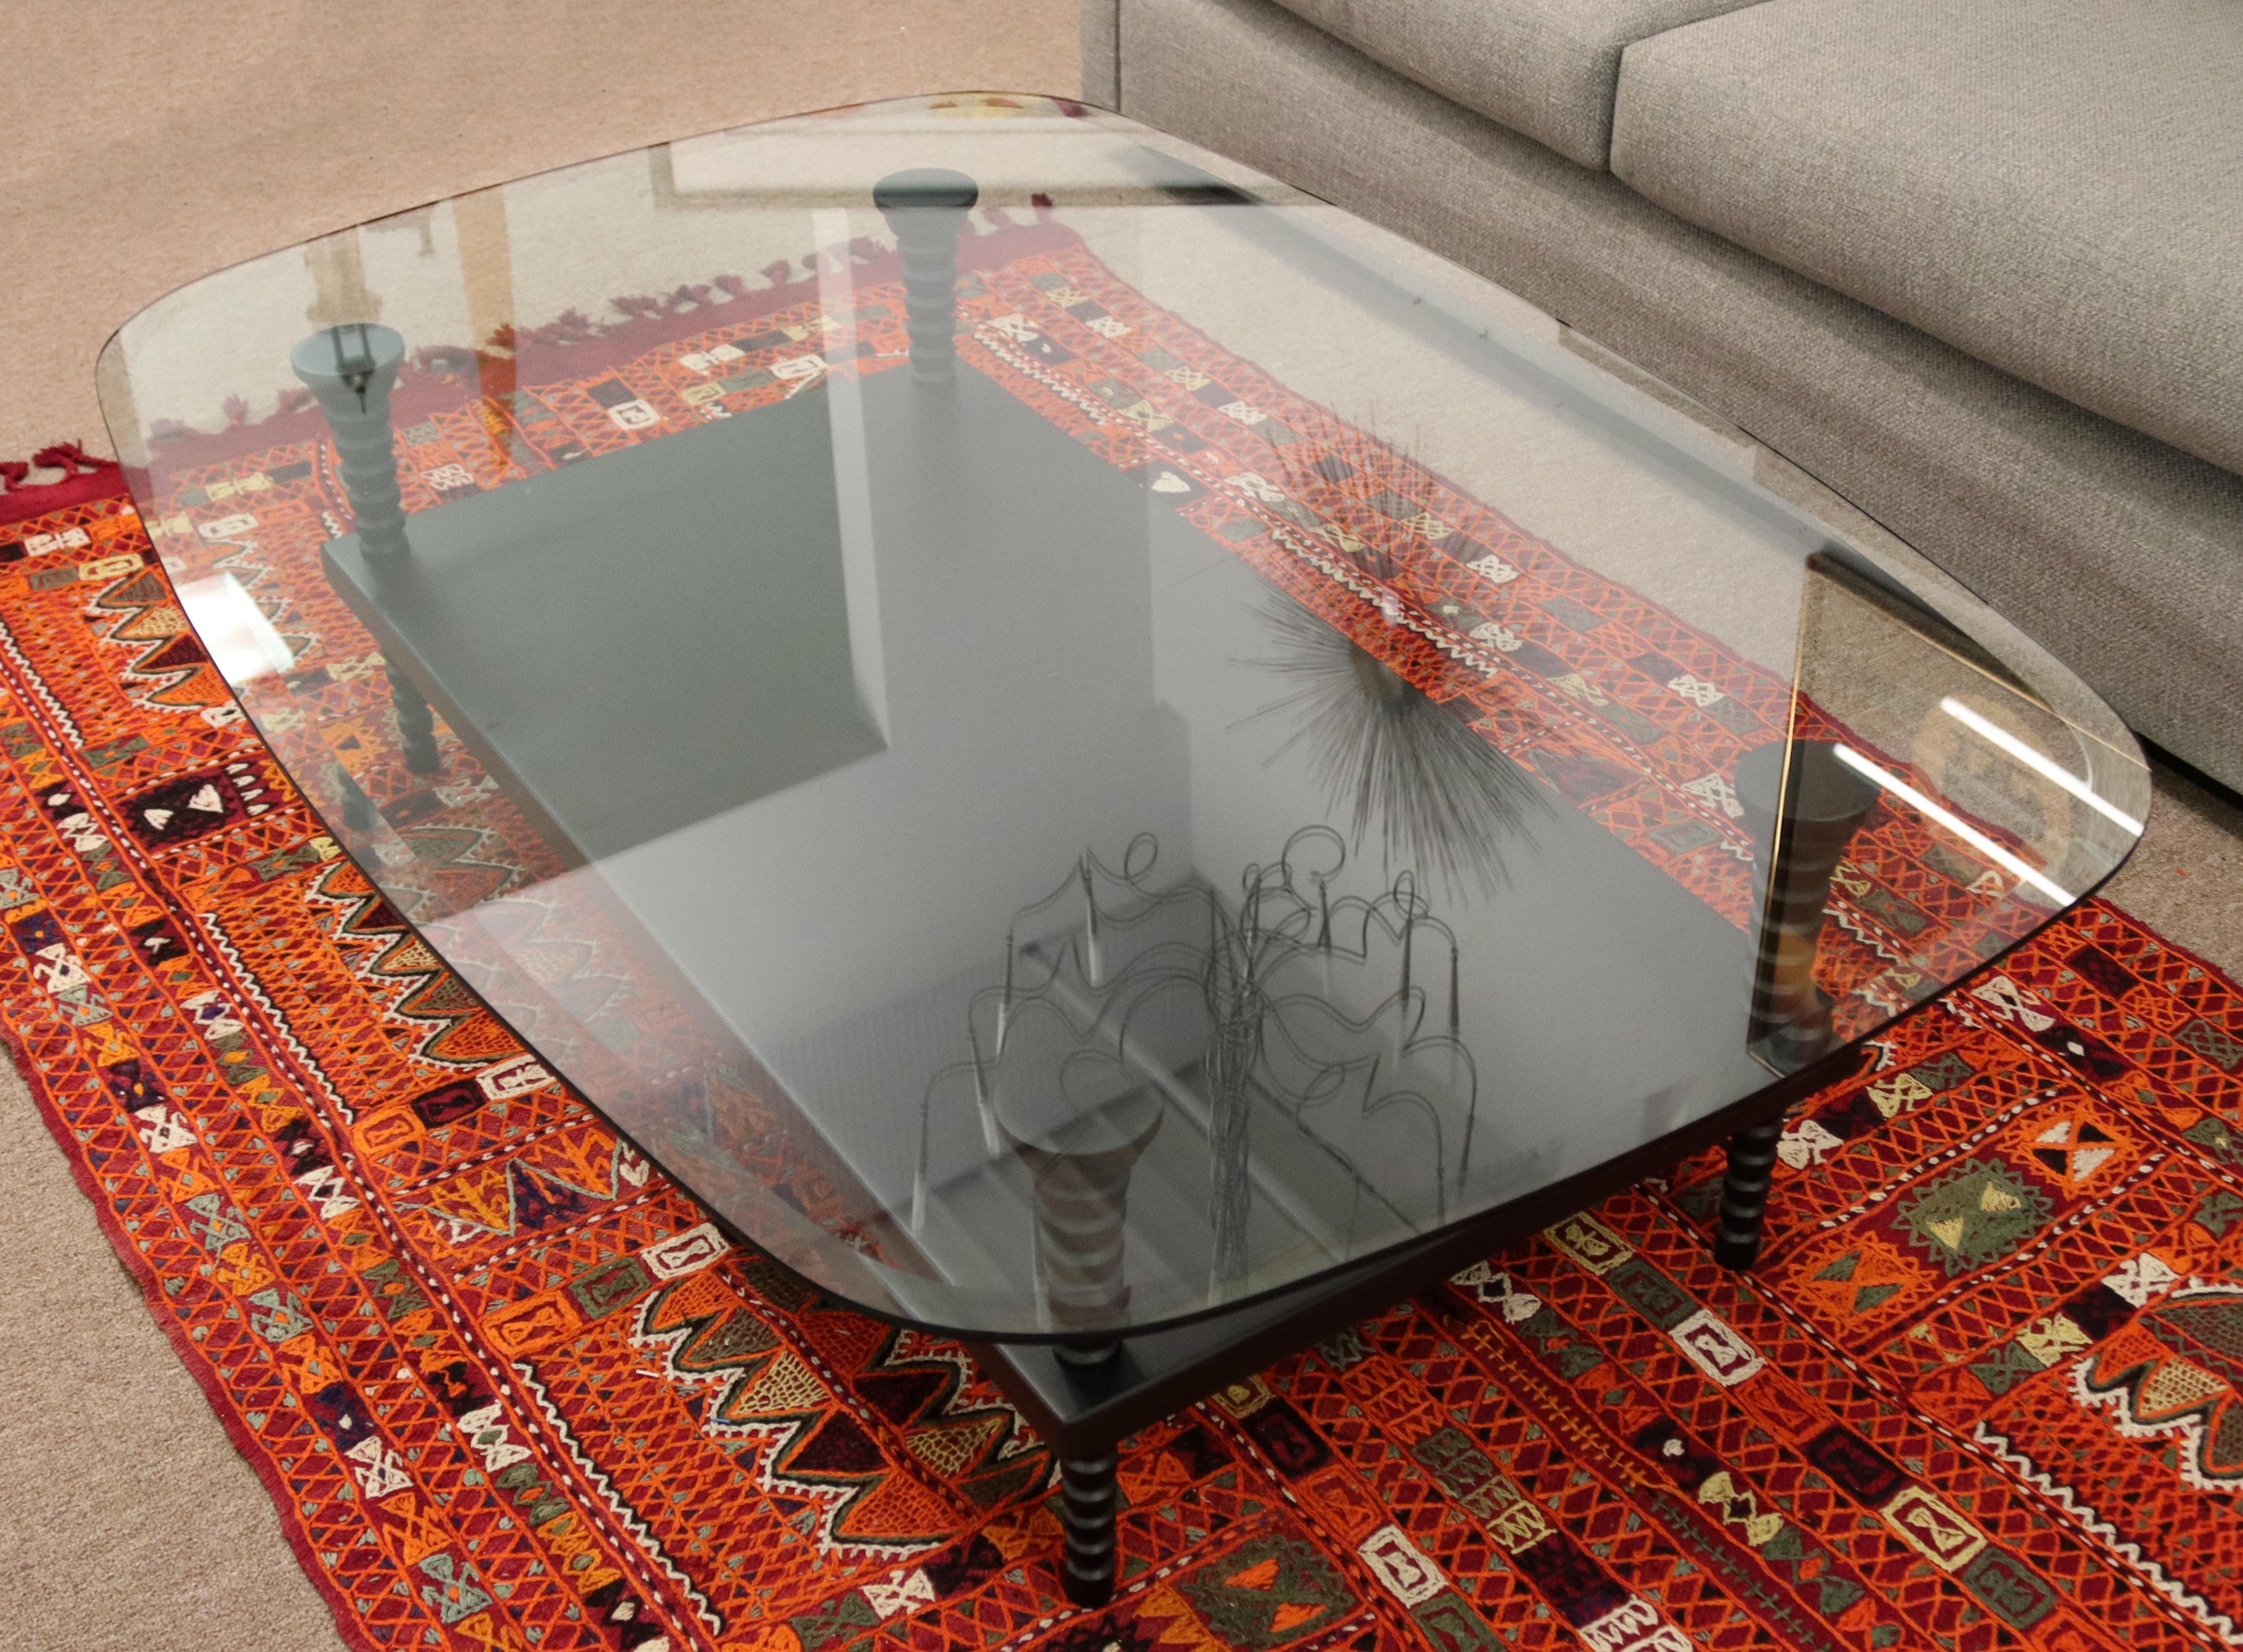 For your consideration is a gorgeous, rectangular coffee table, with a glass top, by Dialogica, circa the 1990s. In excellent condition. The dimensions are 60